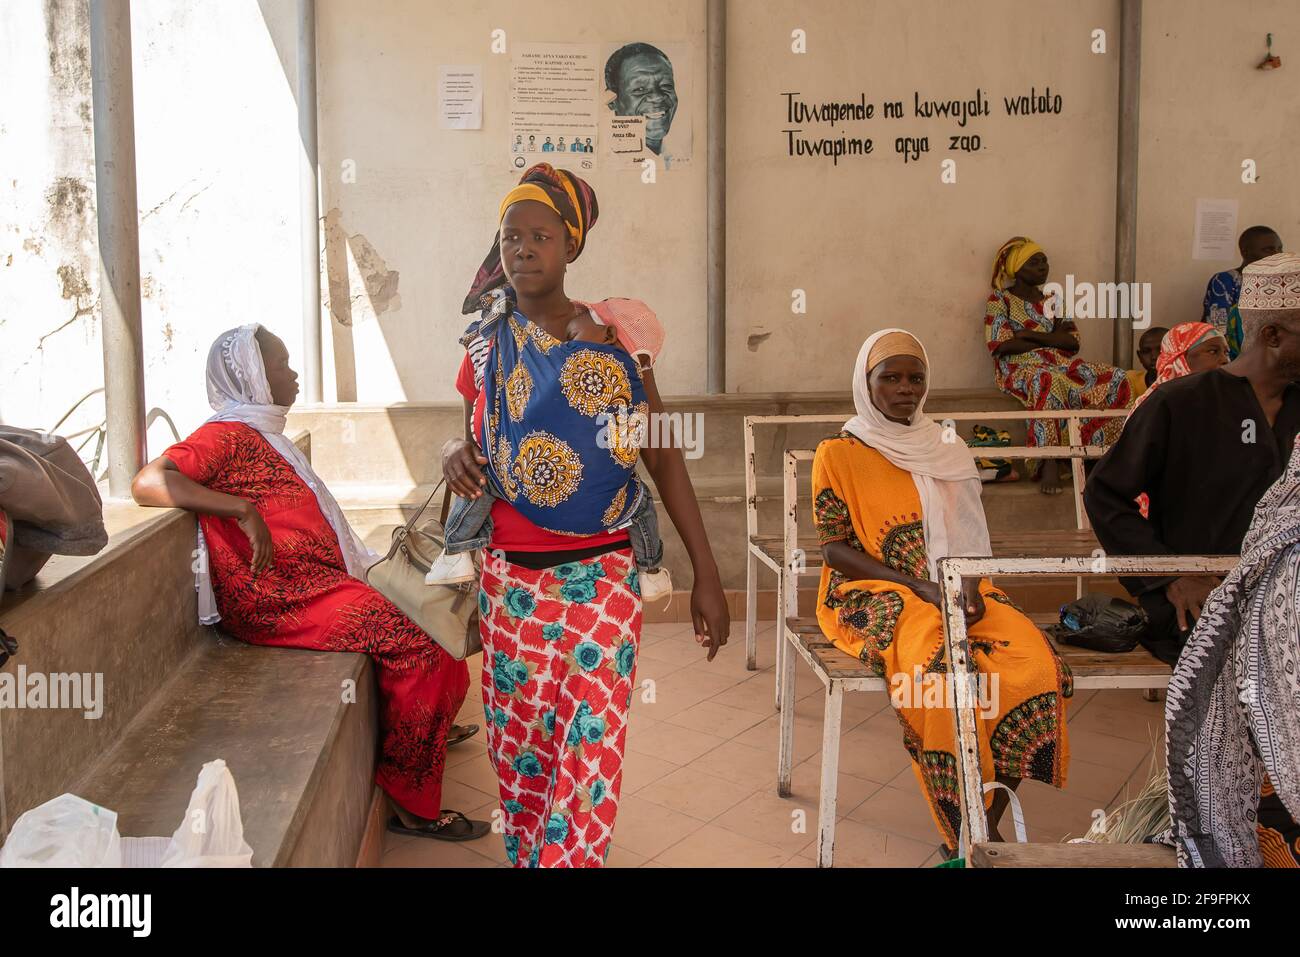 Dodoma, Tanzania. 10-10-2018. Young black muslim mother holding her baby on her arms is going to receive treatment by a doctor in a rural hospital in Stock Photo